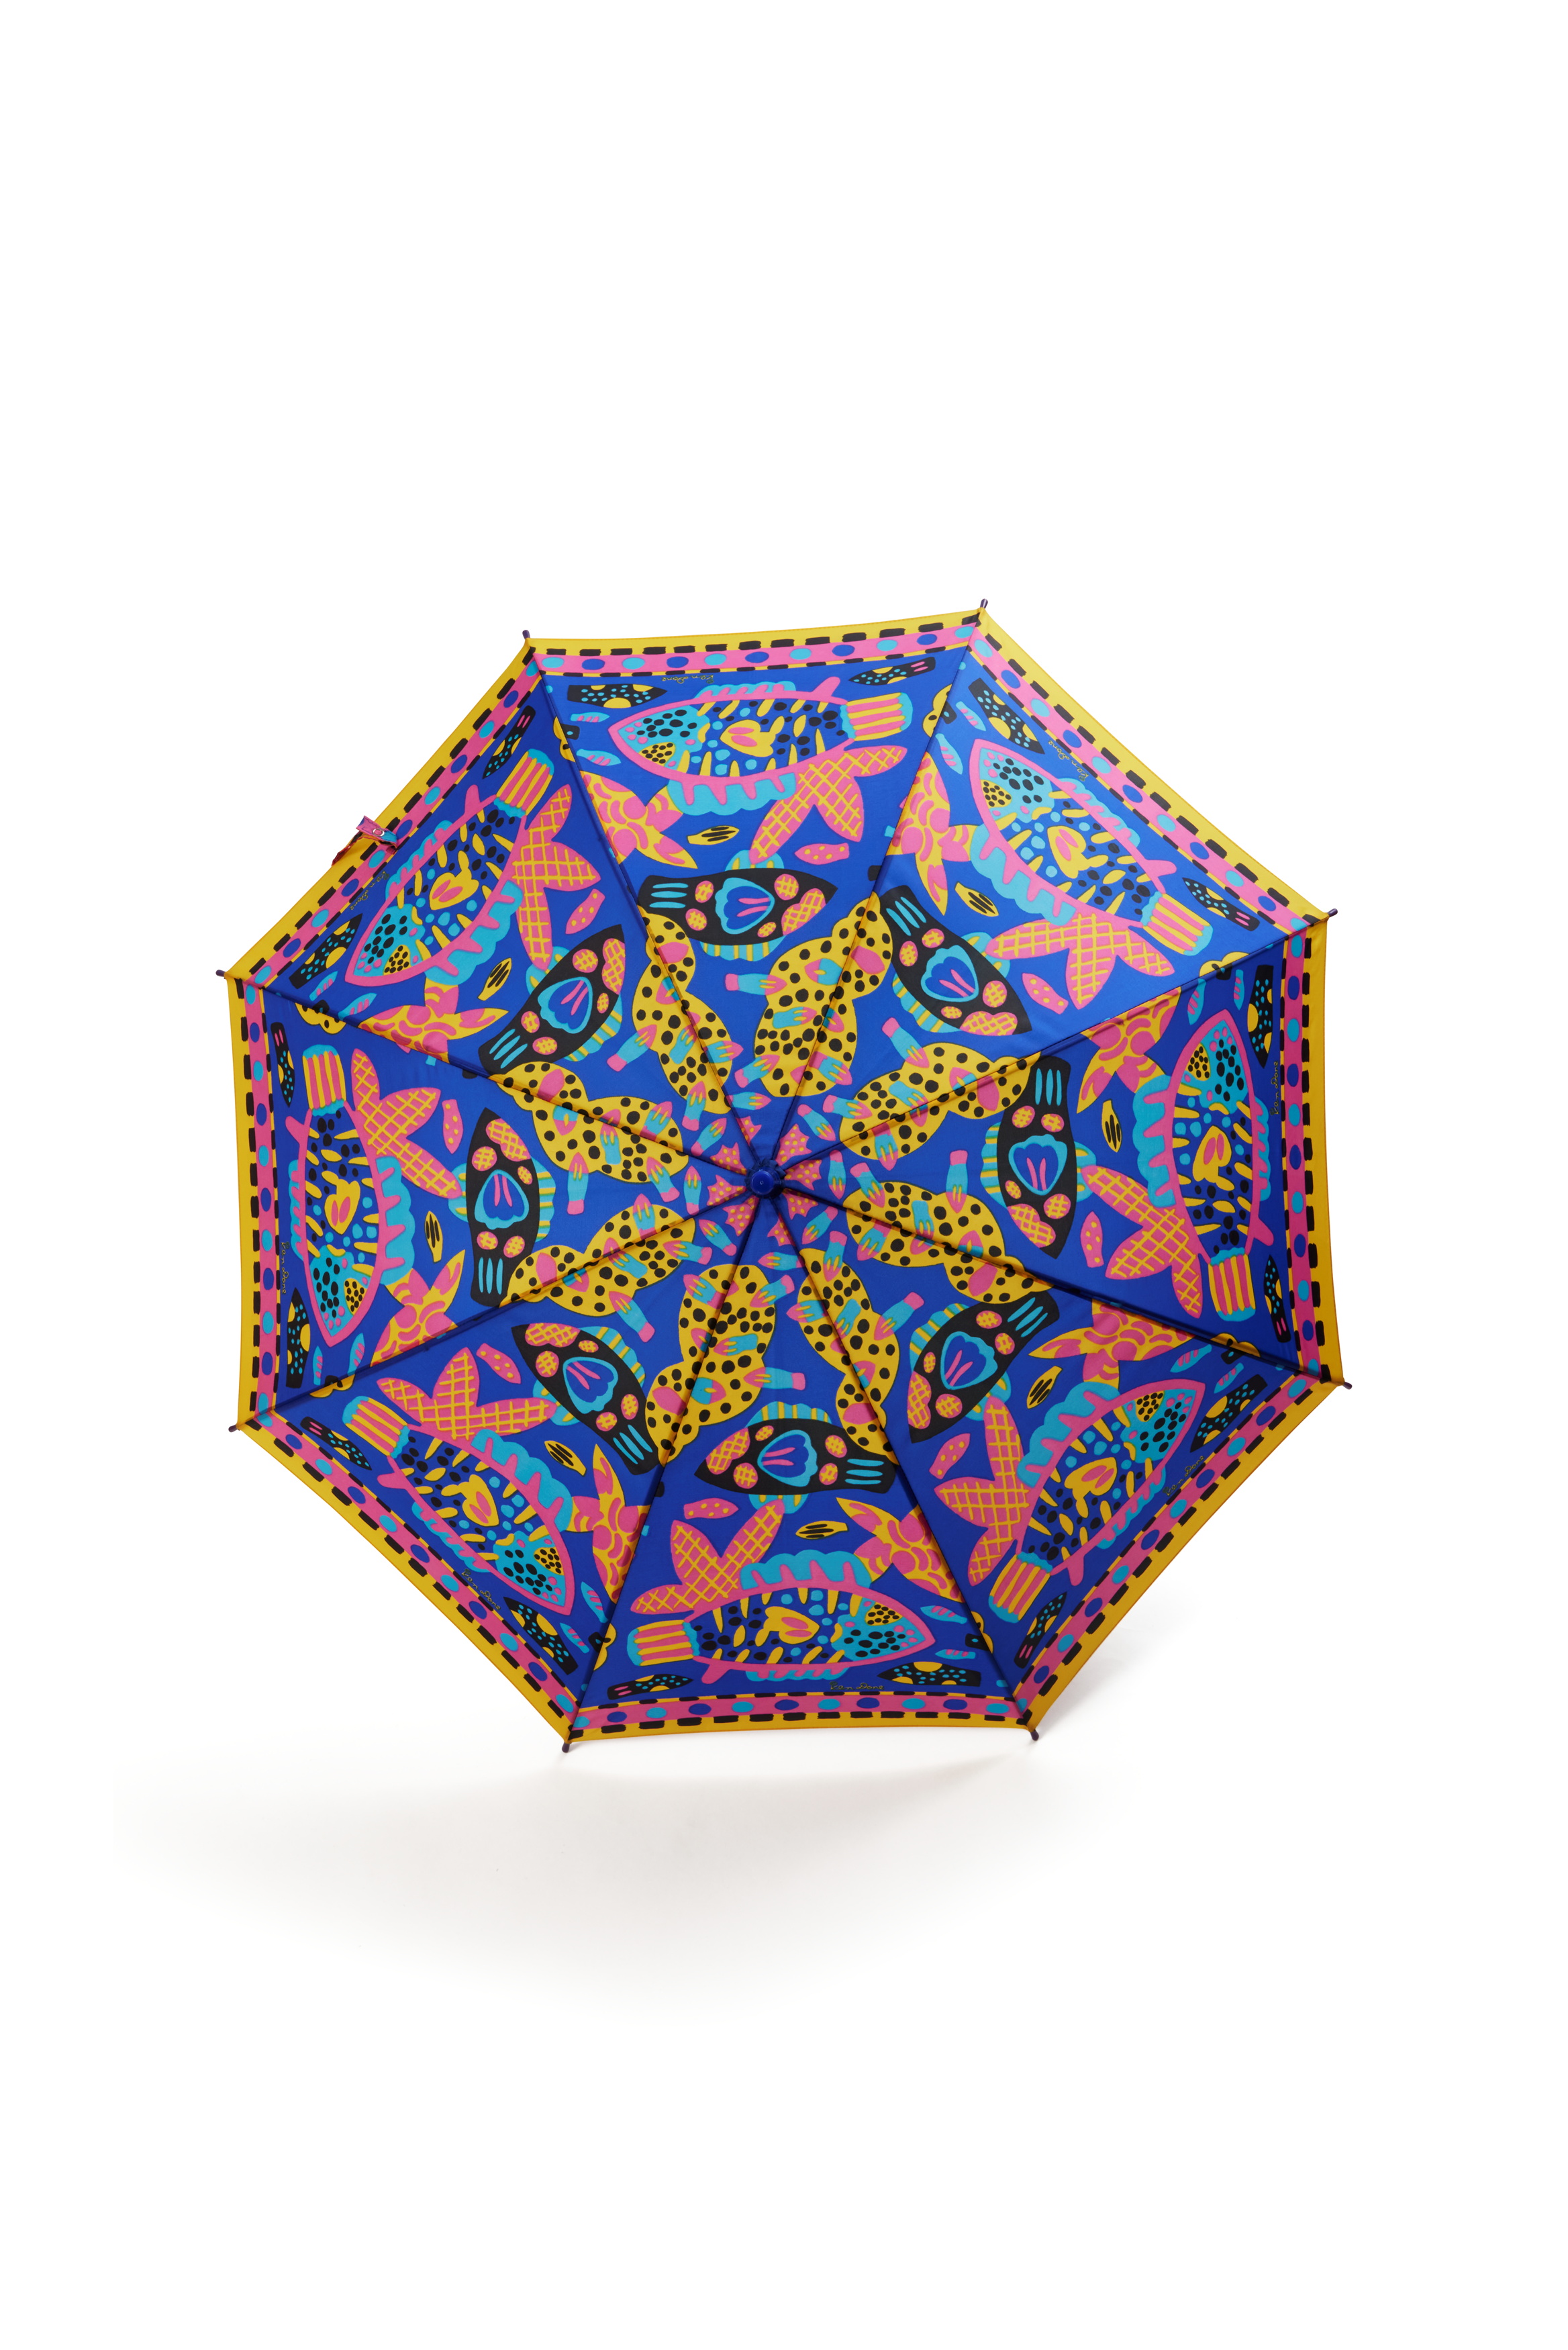 'Barrier Reef' umbrella by Ken Done design for Oroton